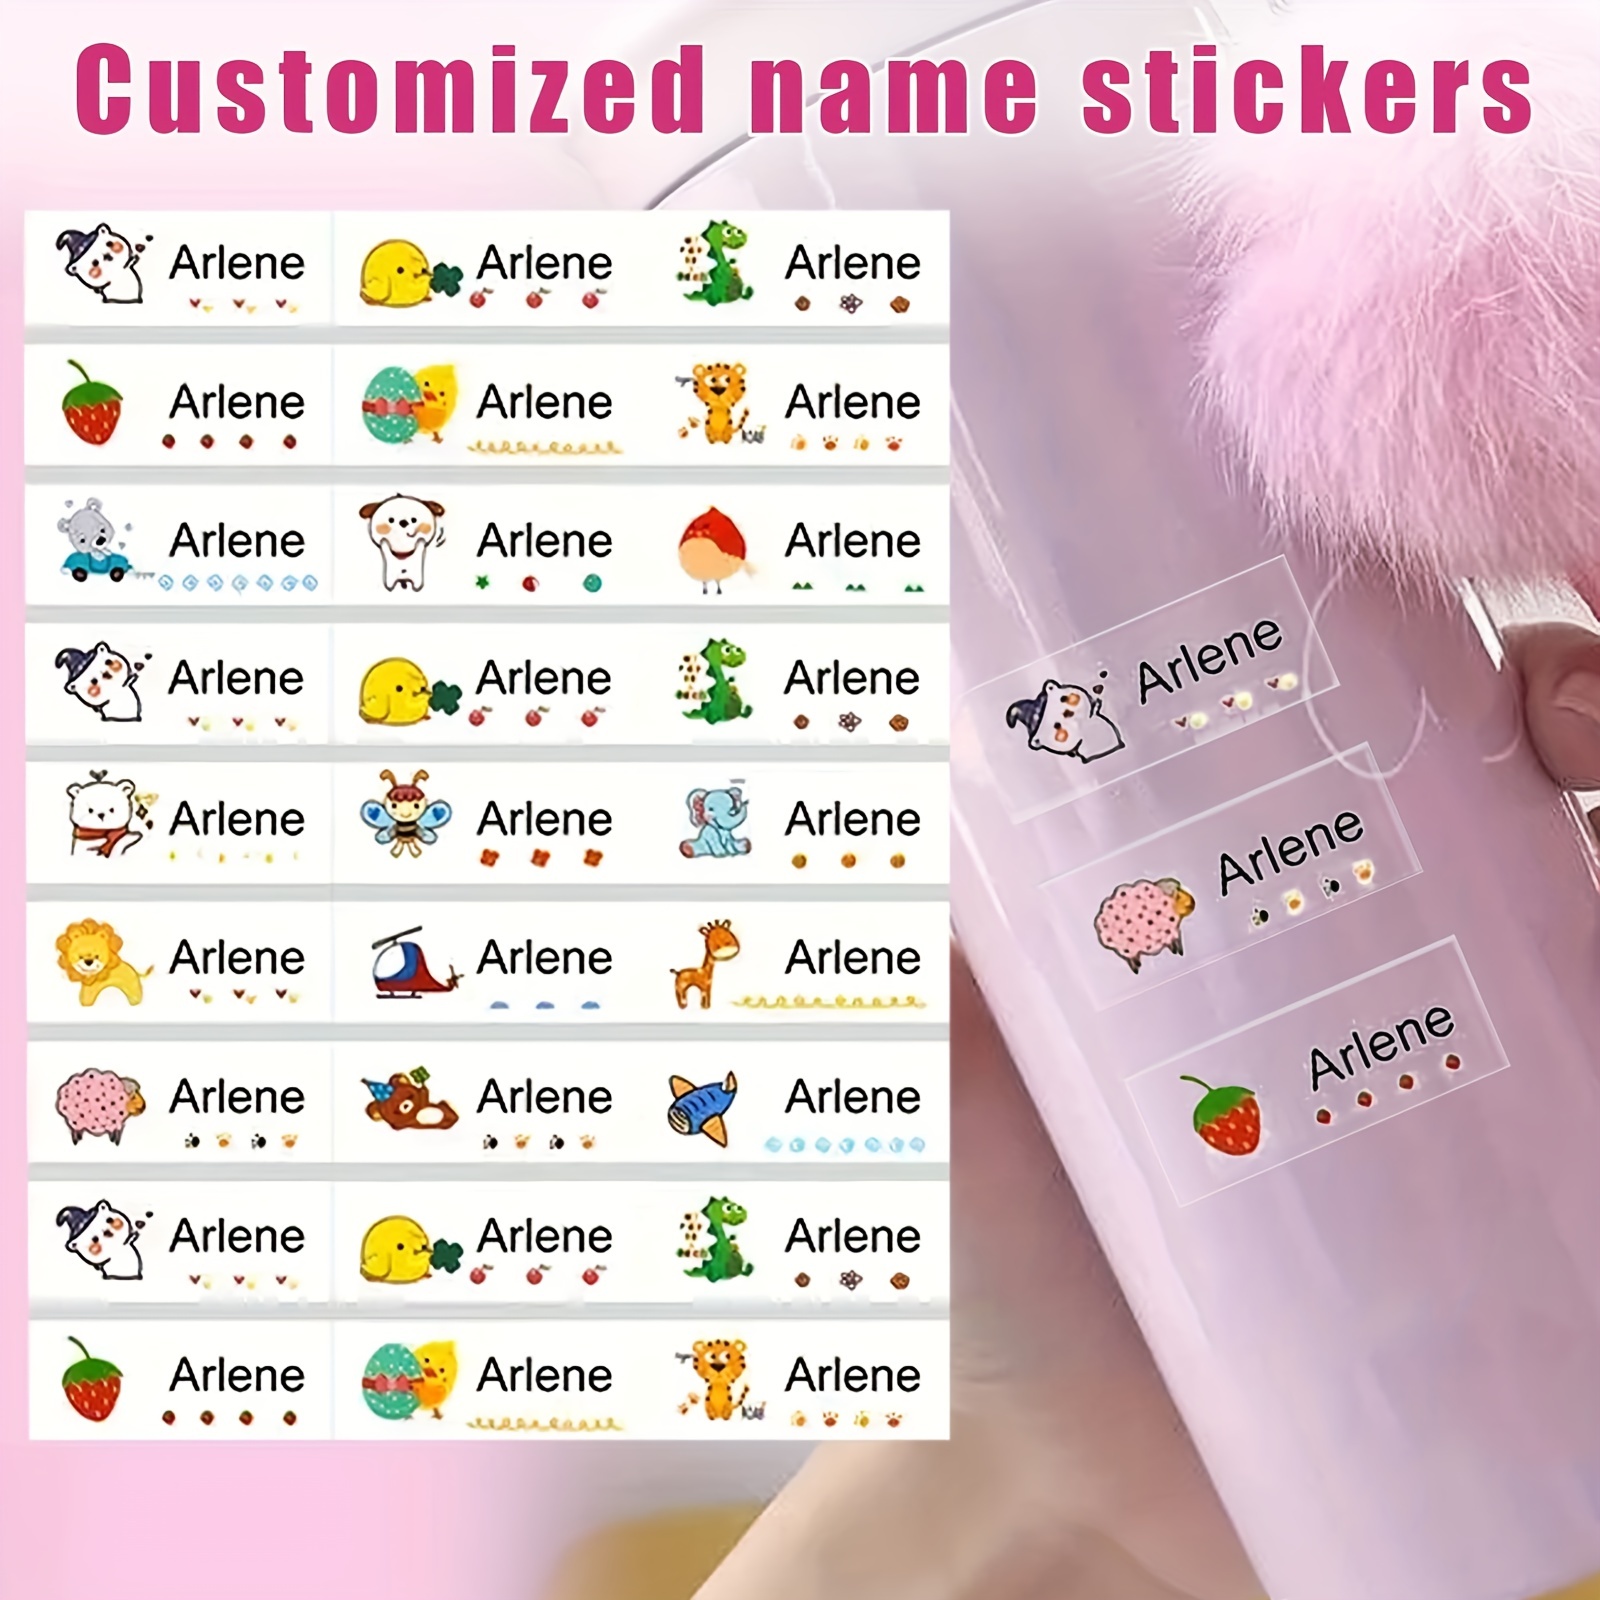 The Name Stamp for Kids Clothes, Kids Name Stamp, Waterproof and Durable,  Kids Clothing Name Stamp, 4 Colors and 36 Cartoon Patterns, Custom Name